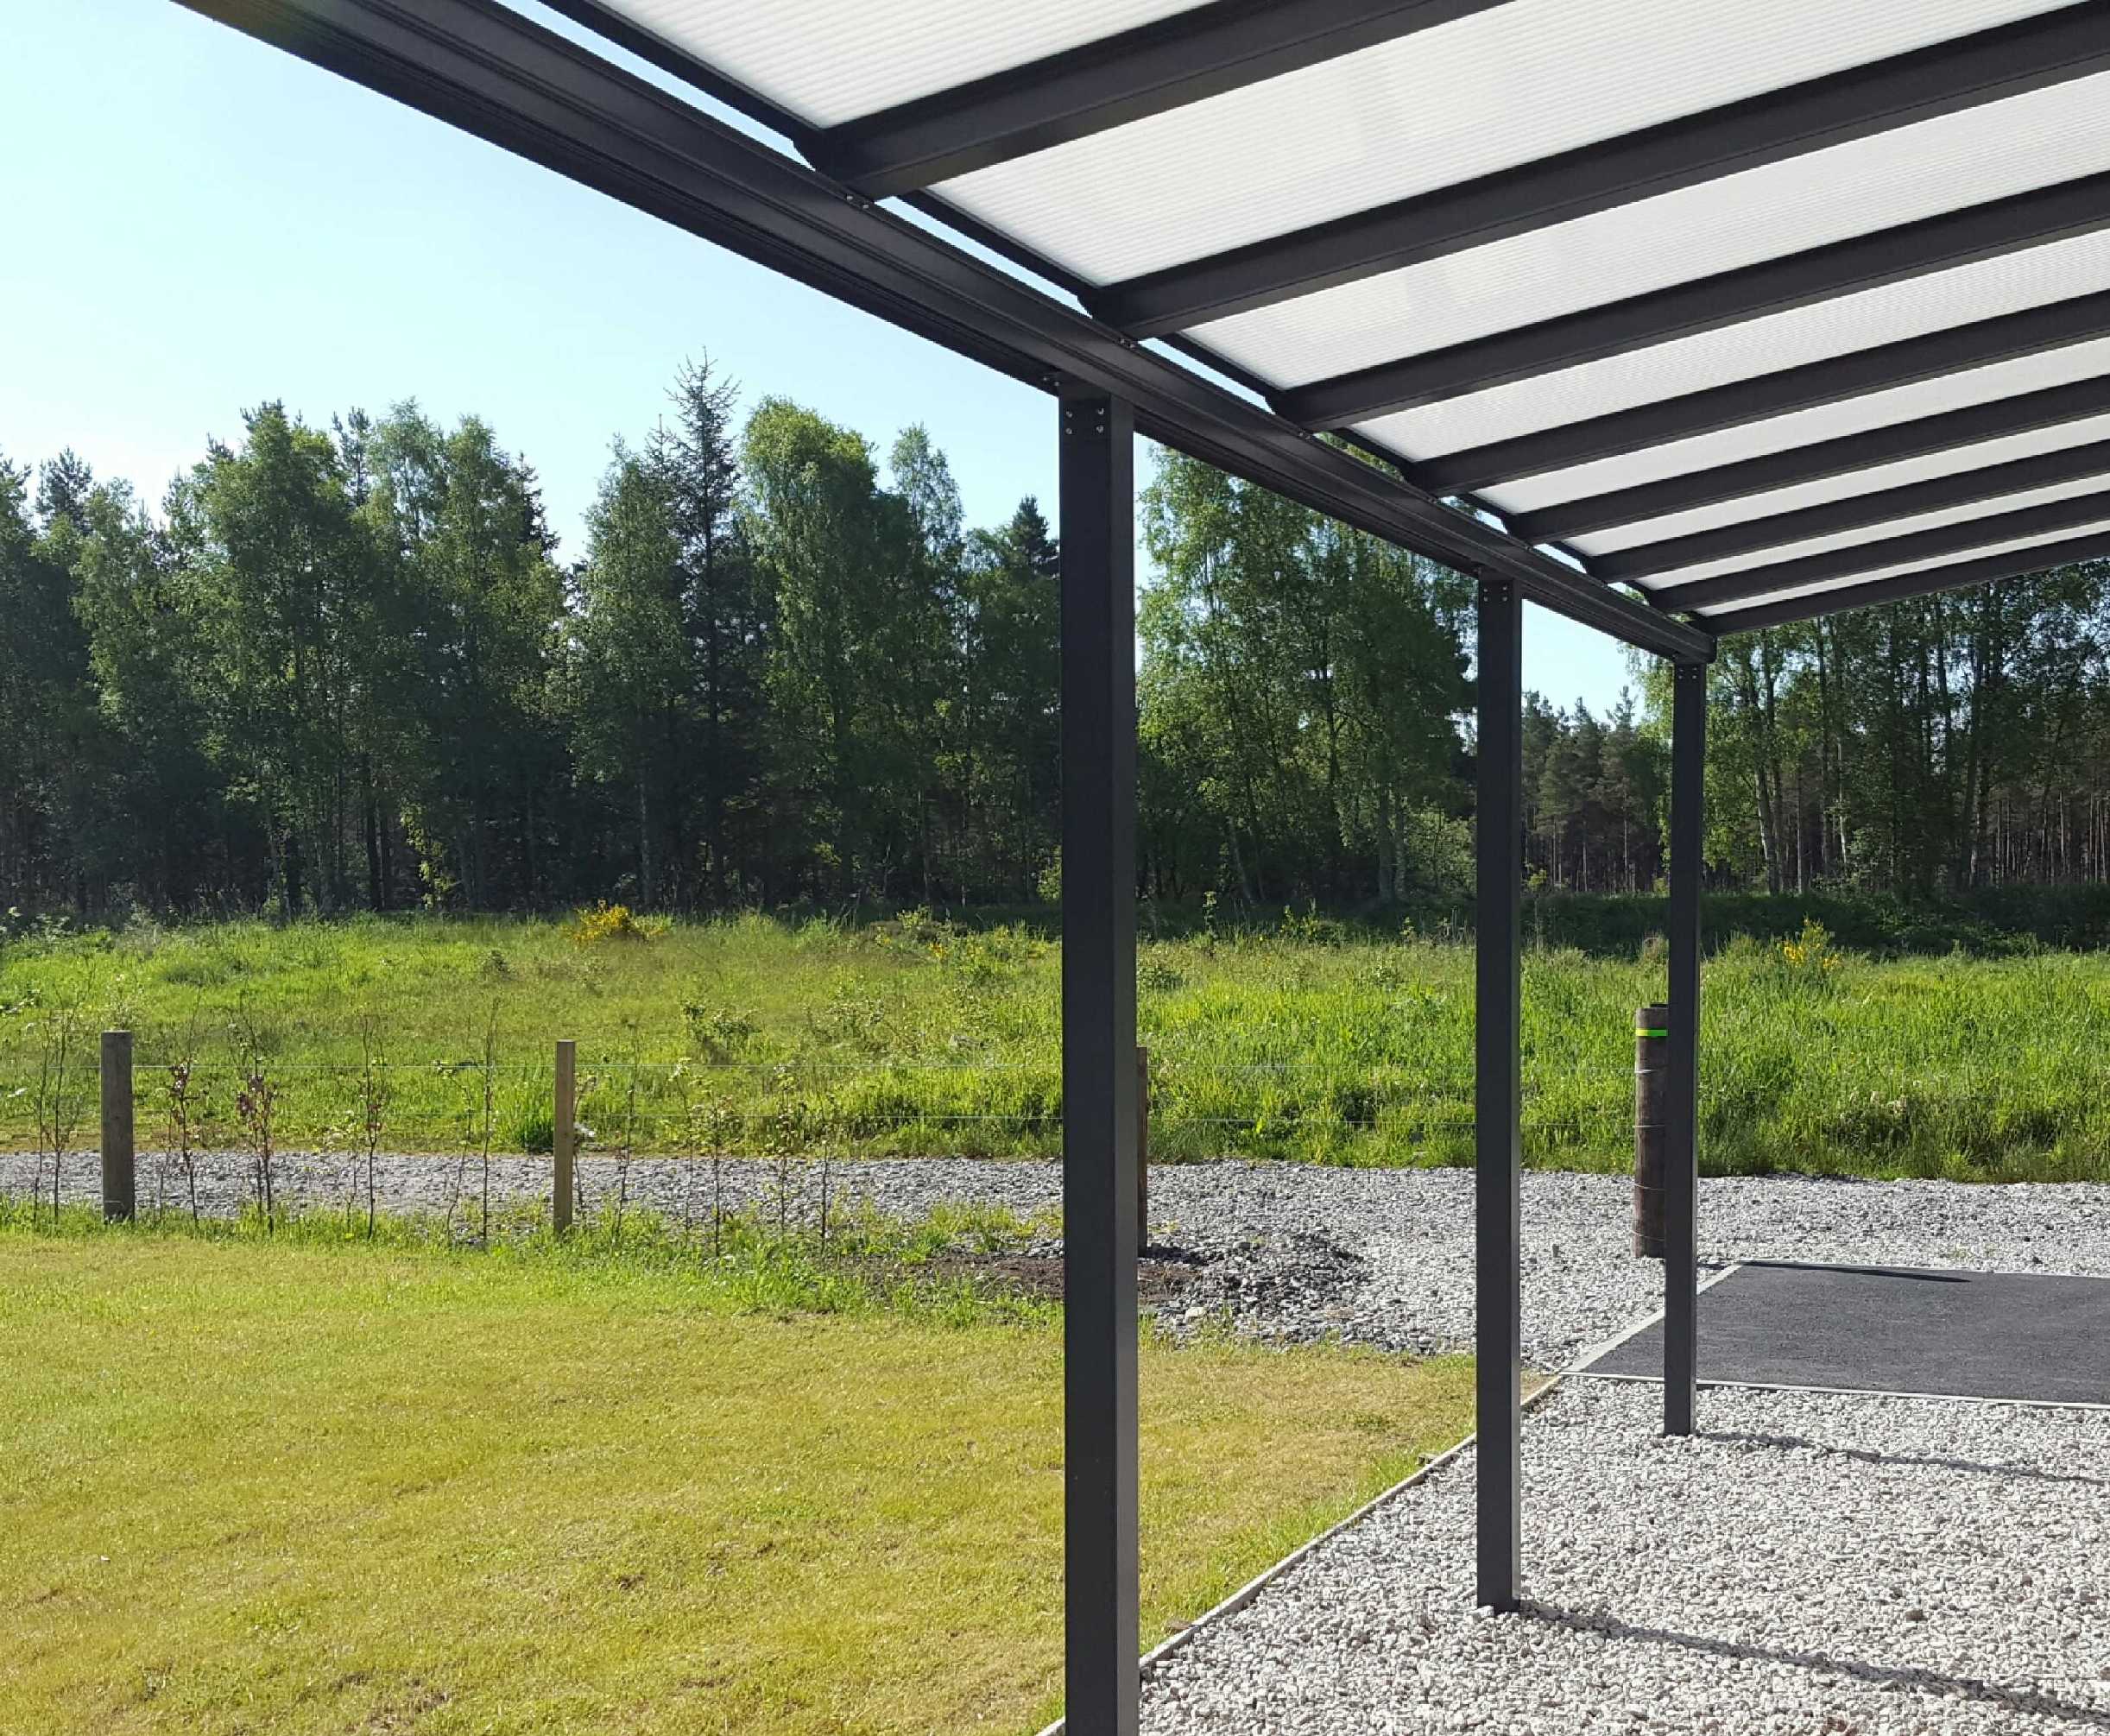 Omega Smart Lean-To Canopy, Anthracite Grey, 6mm Glass Clear Plate Polycarbonate Glazing - 5.6m (W) x 2.5m (P), (3) Supporting Posts